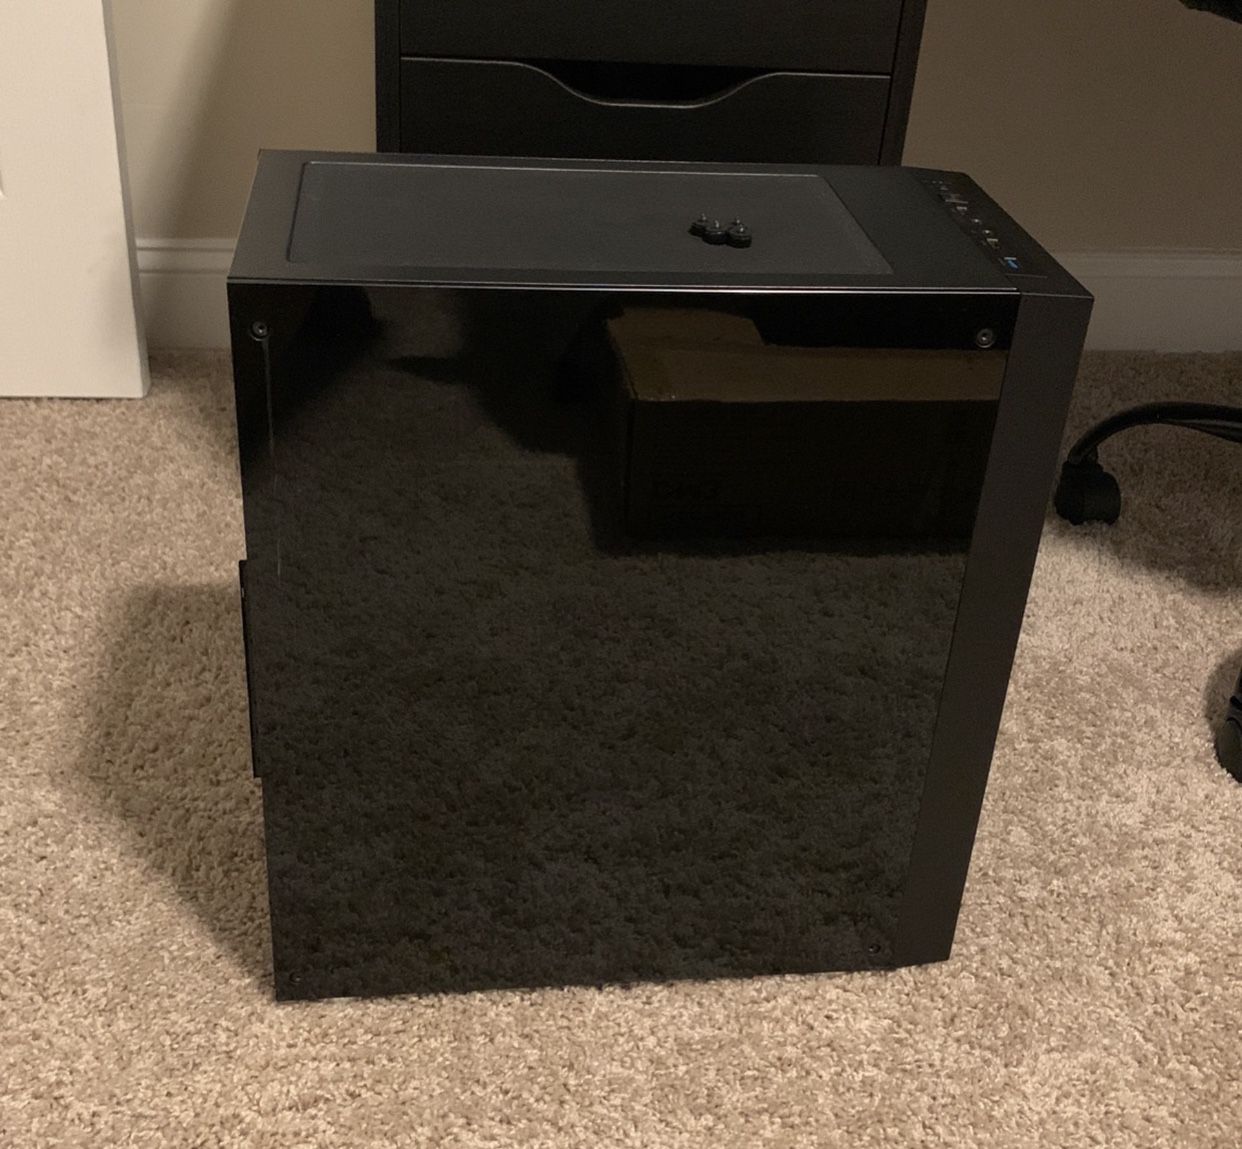 MID TOWER CASE 